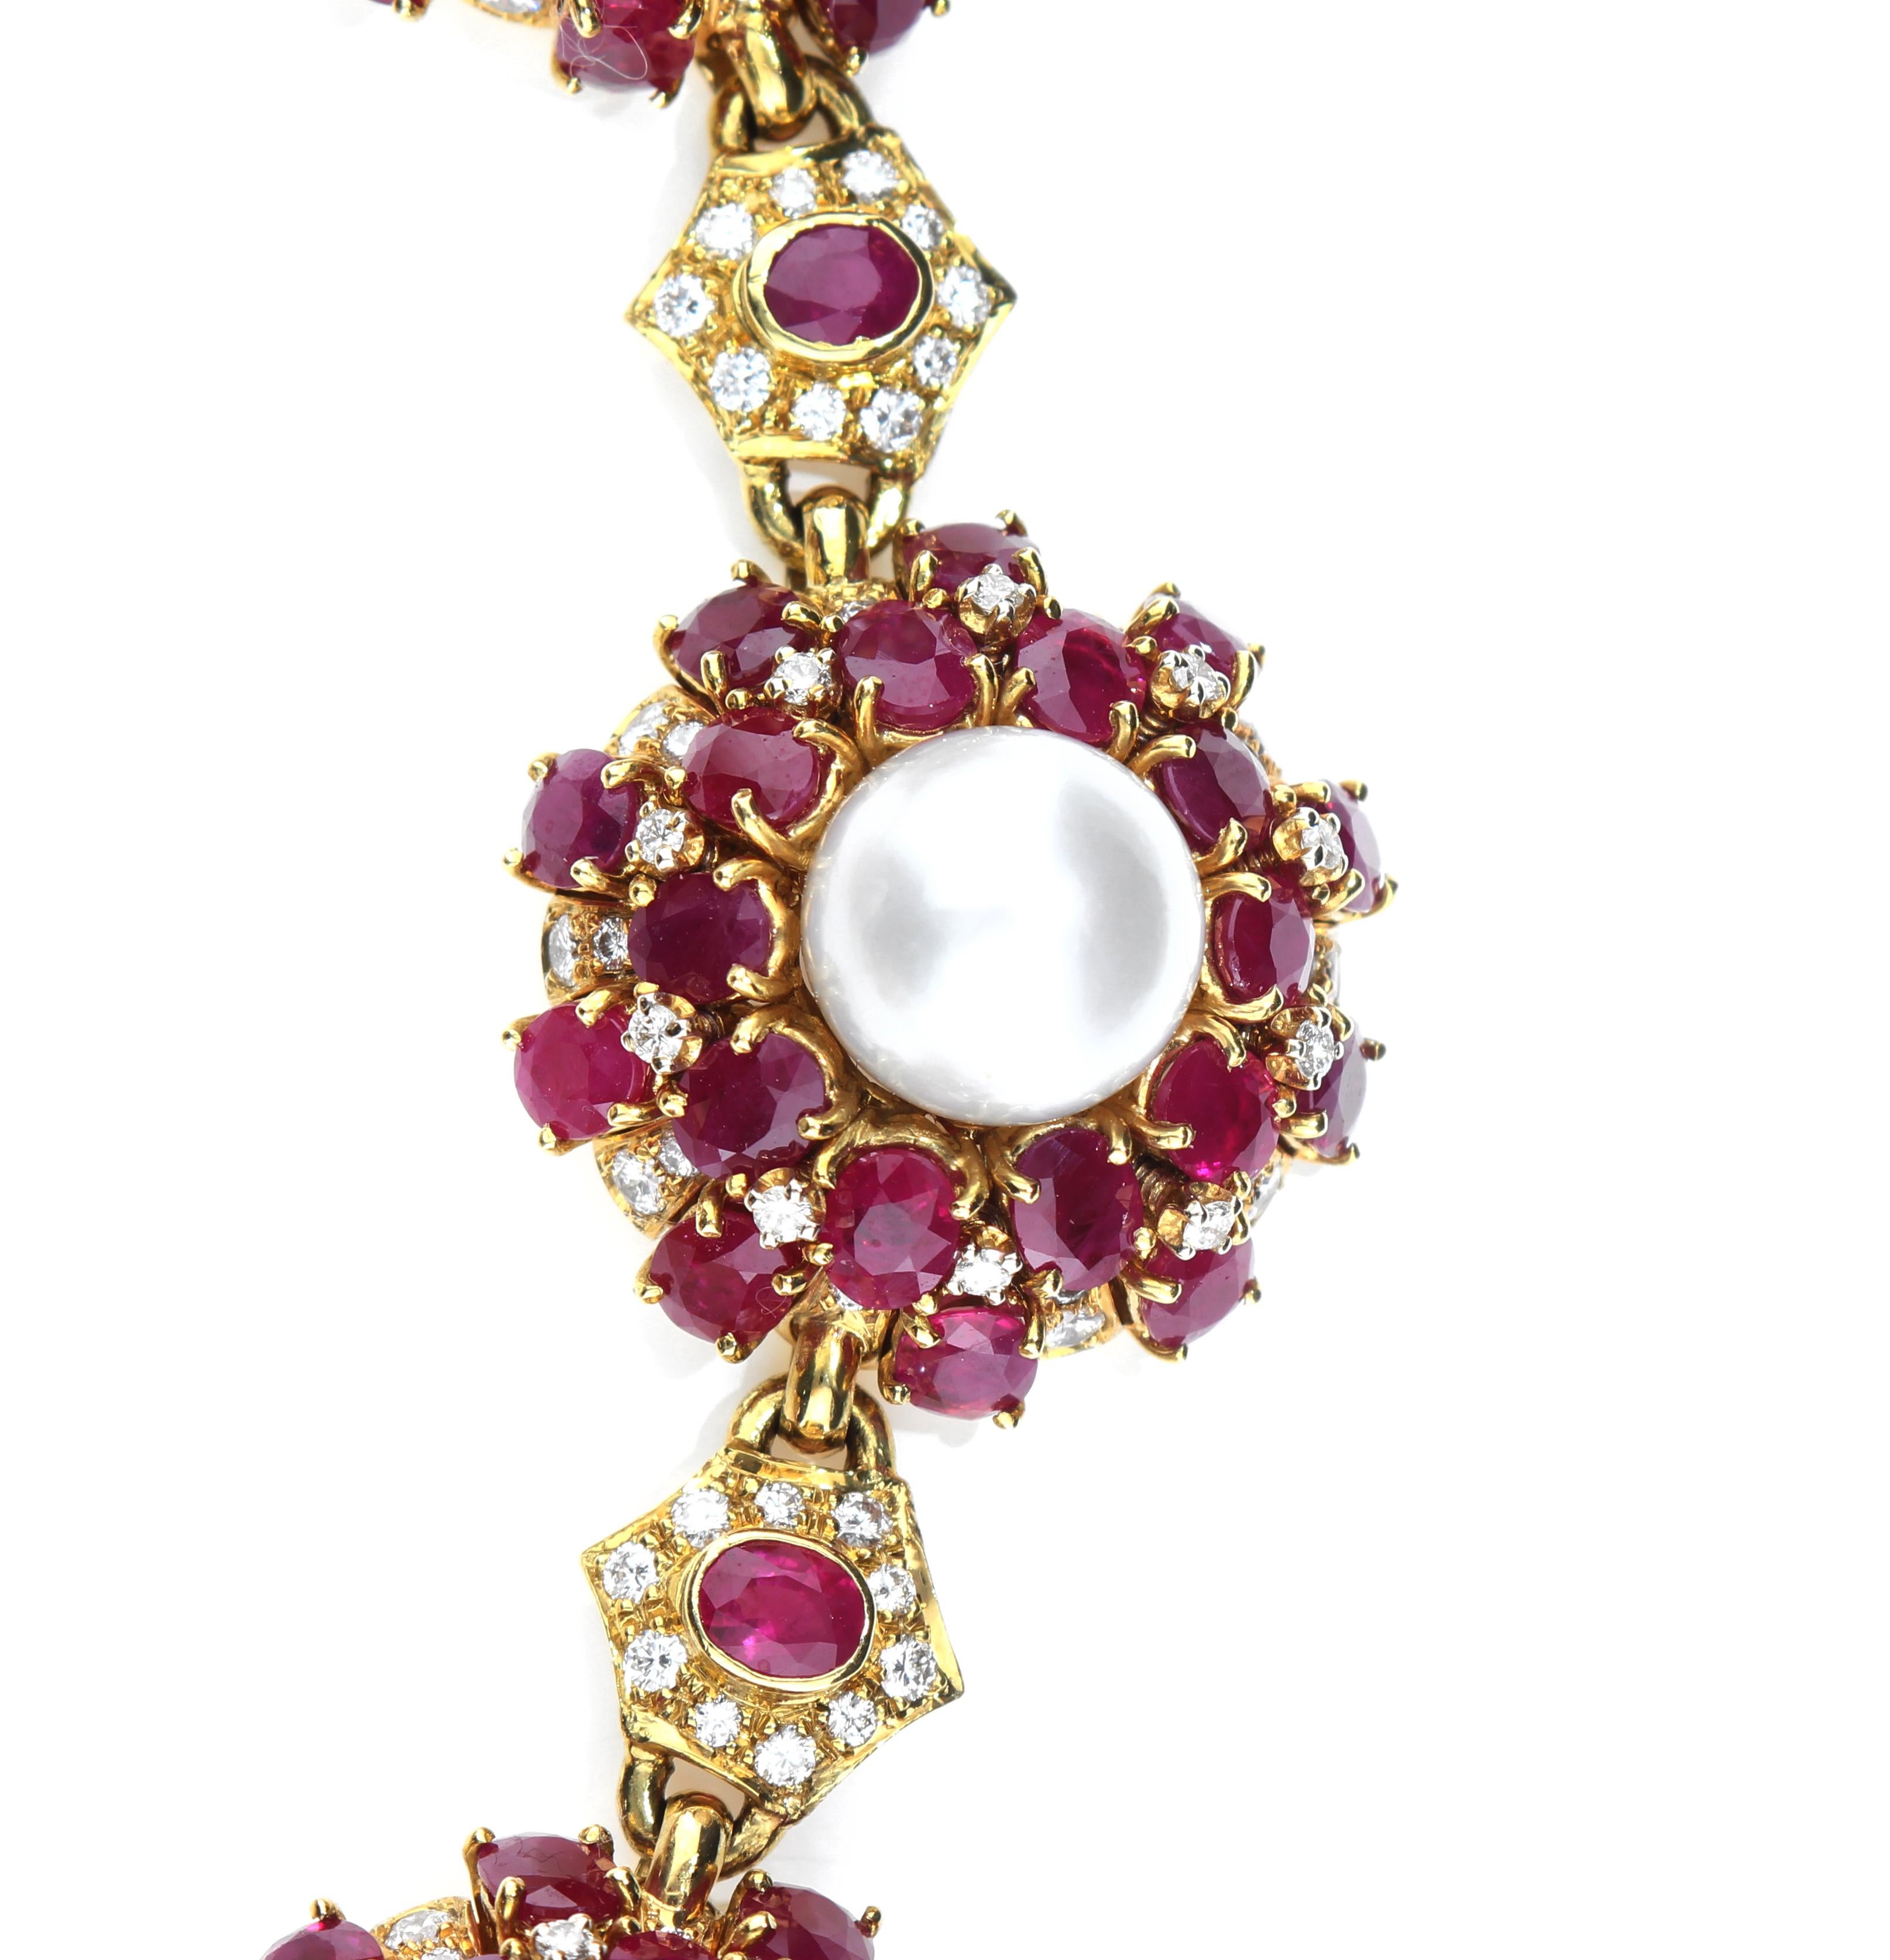 Parure with Rubies, Pearls and Diamonds in 18 Karat Yellow Gold 7